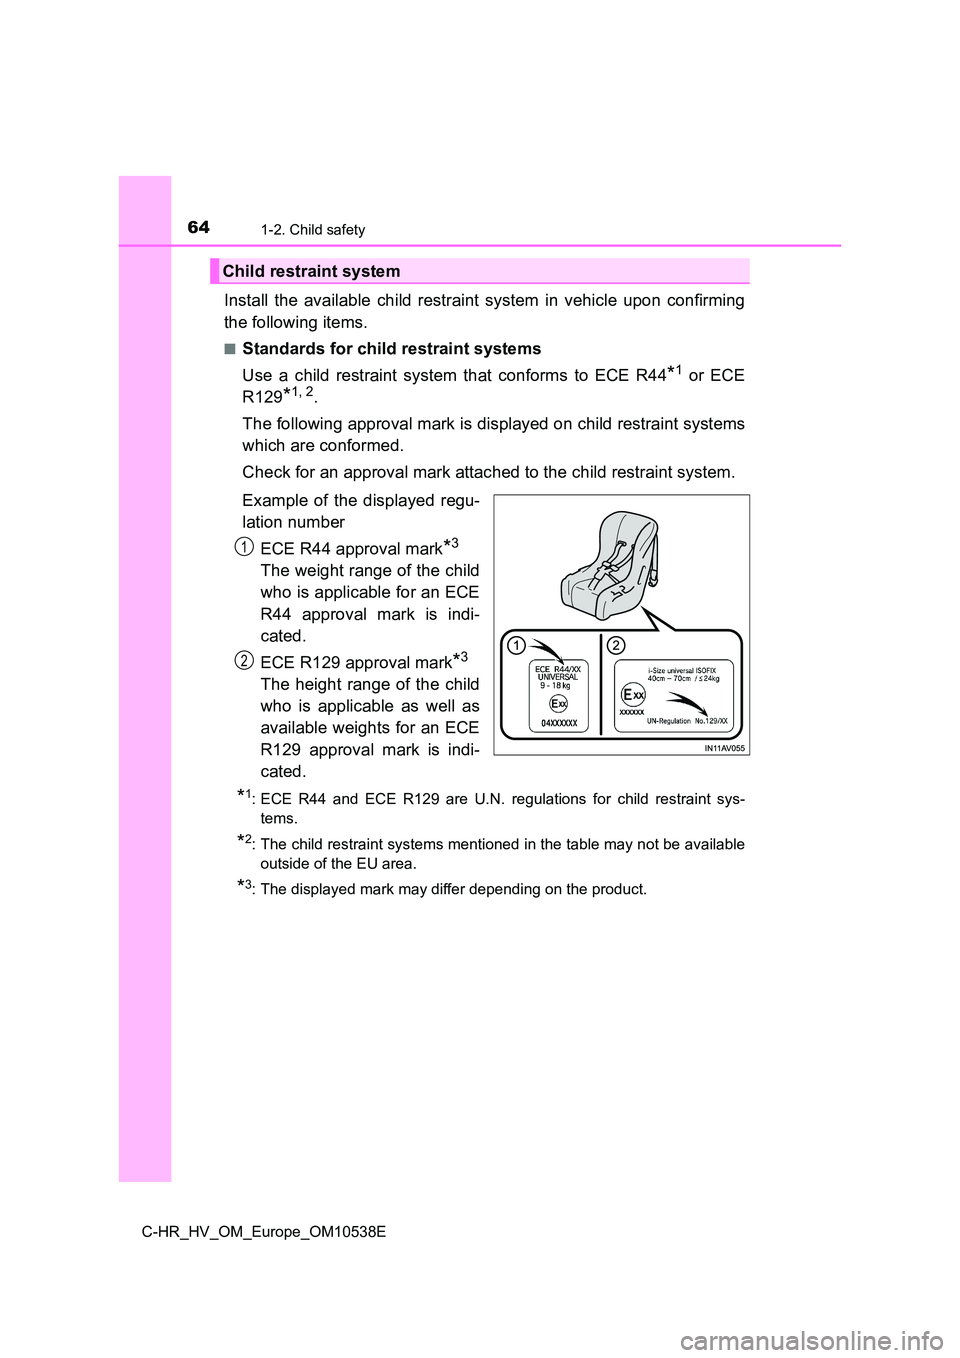 TOYOTA C_HR HYBRID 2017  Owners Manual 641-2. Child safety
C-HR_HV_OM_Europe_OM10538E
Install the available child restraint system in vehicle upon confirming 
the following items.
■Standards for child restraint systems 
Use a child restr